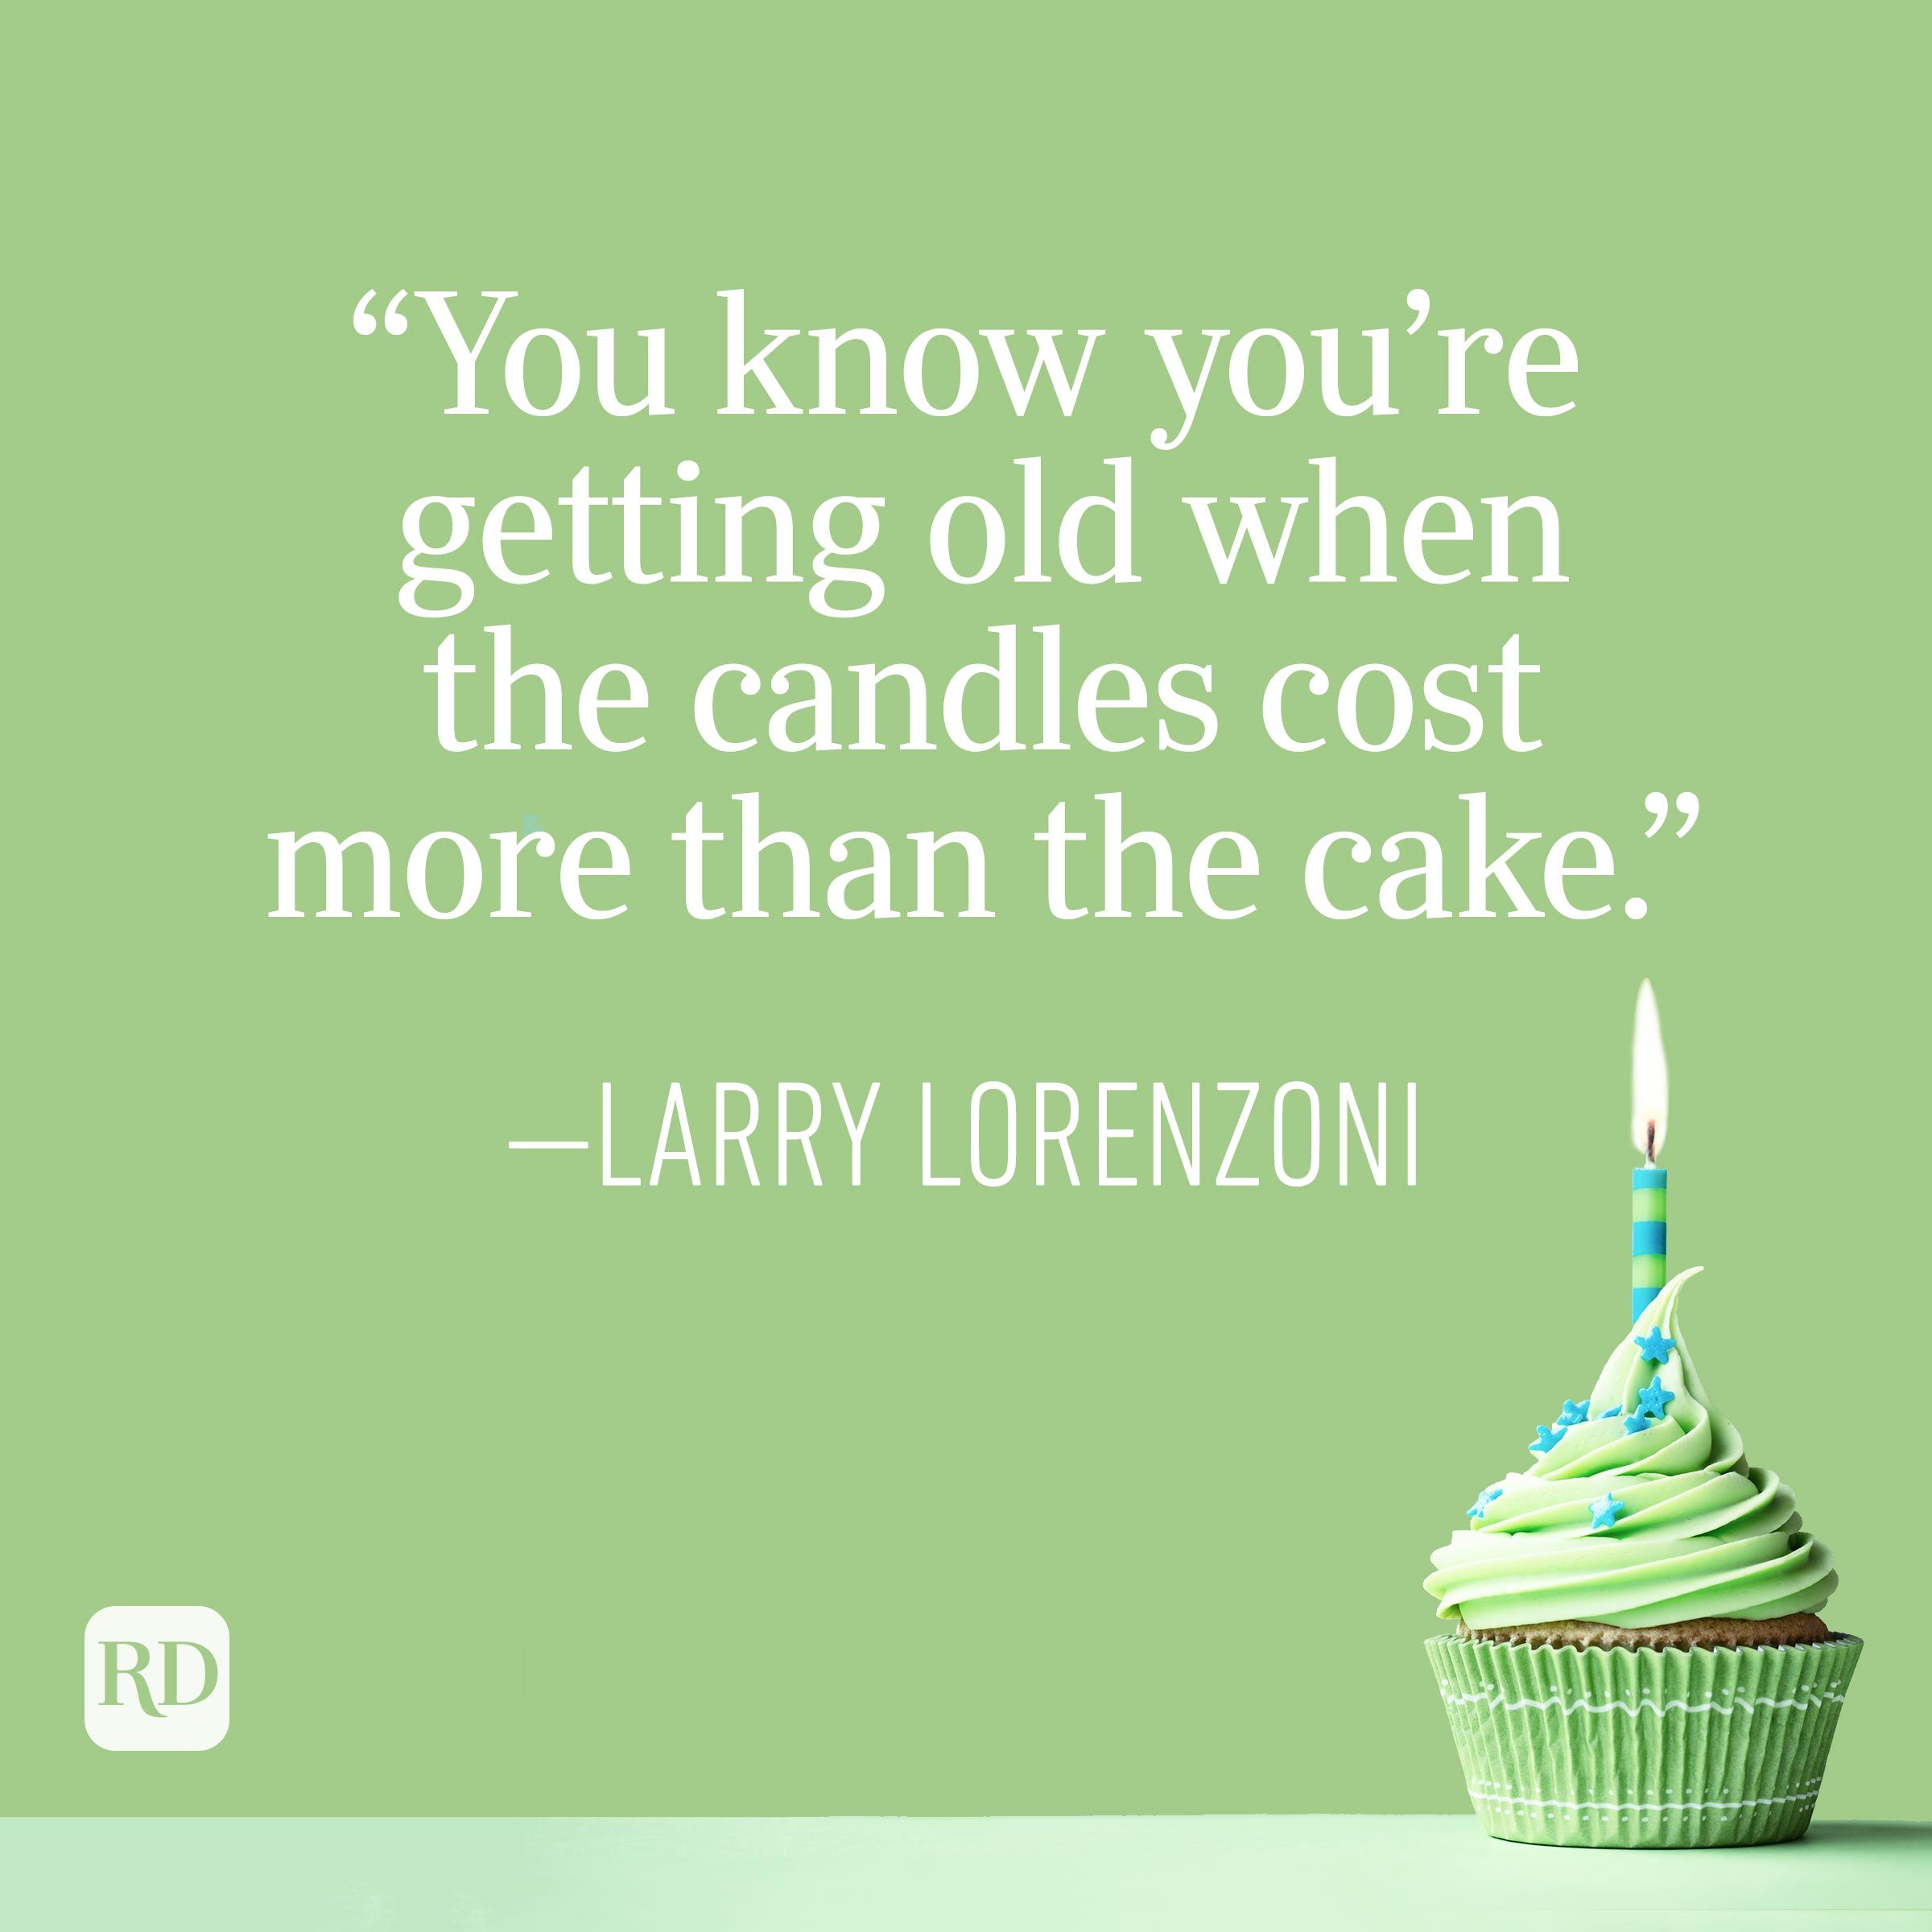 "You know you're getting old when the candles cost more than the cake." —Larry Lorenzoni